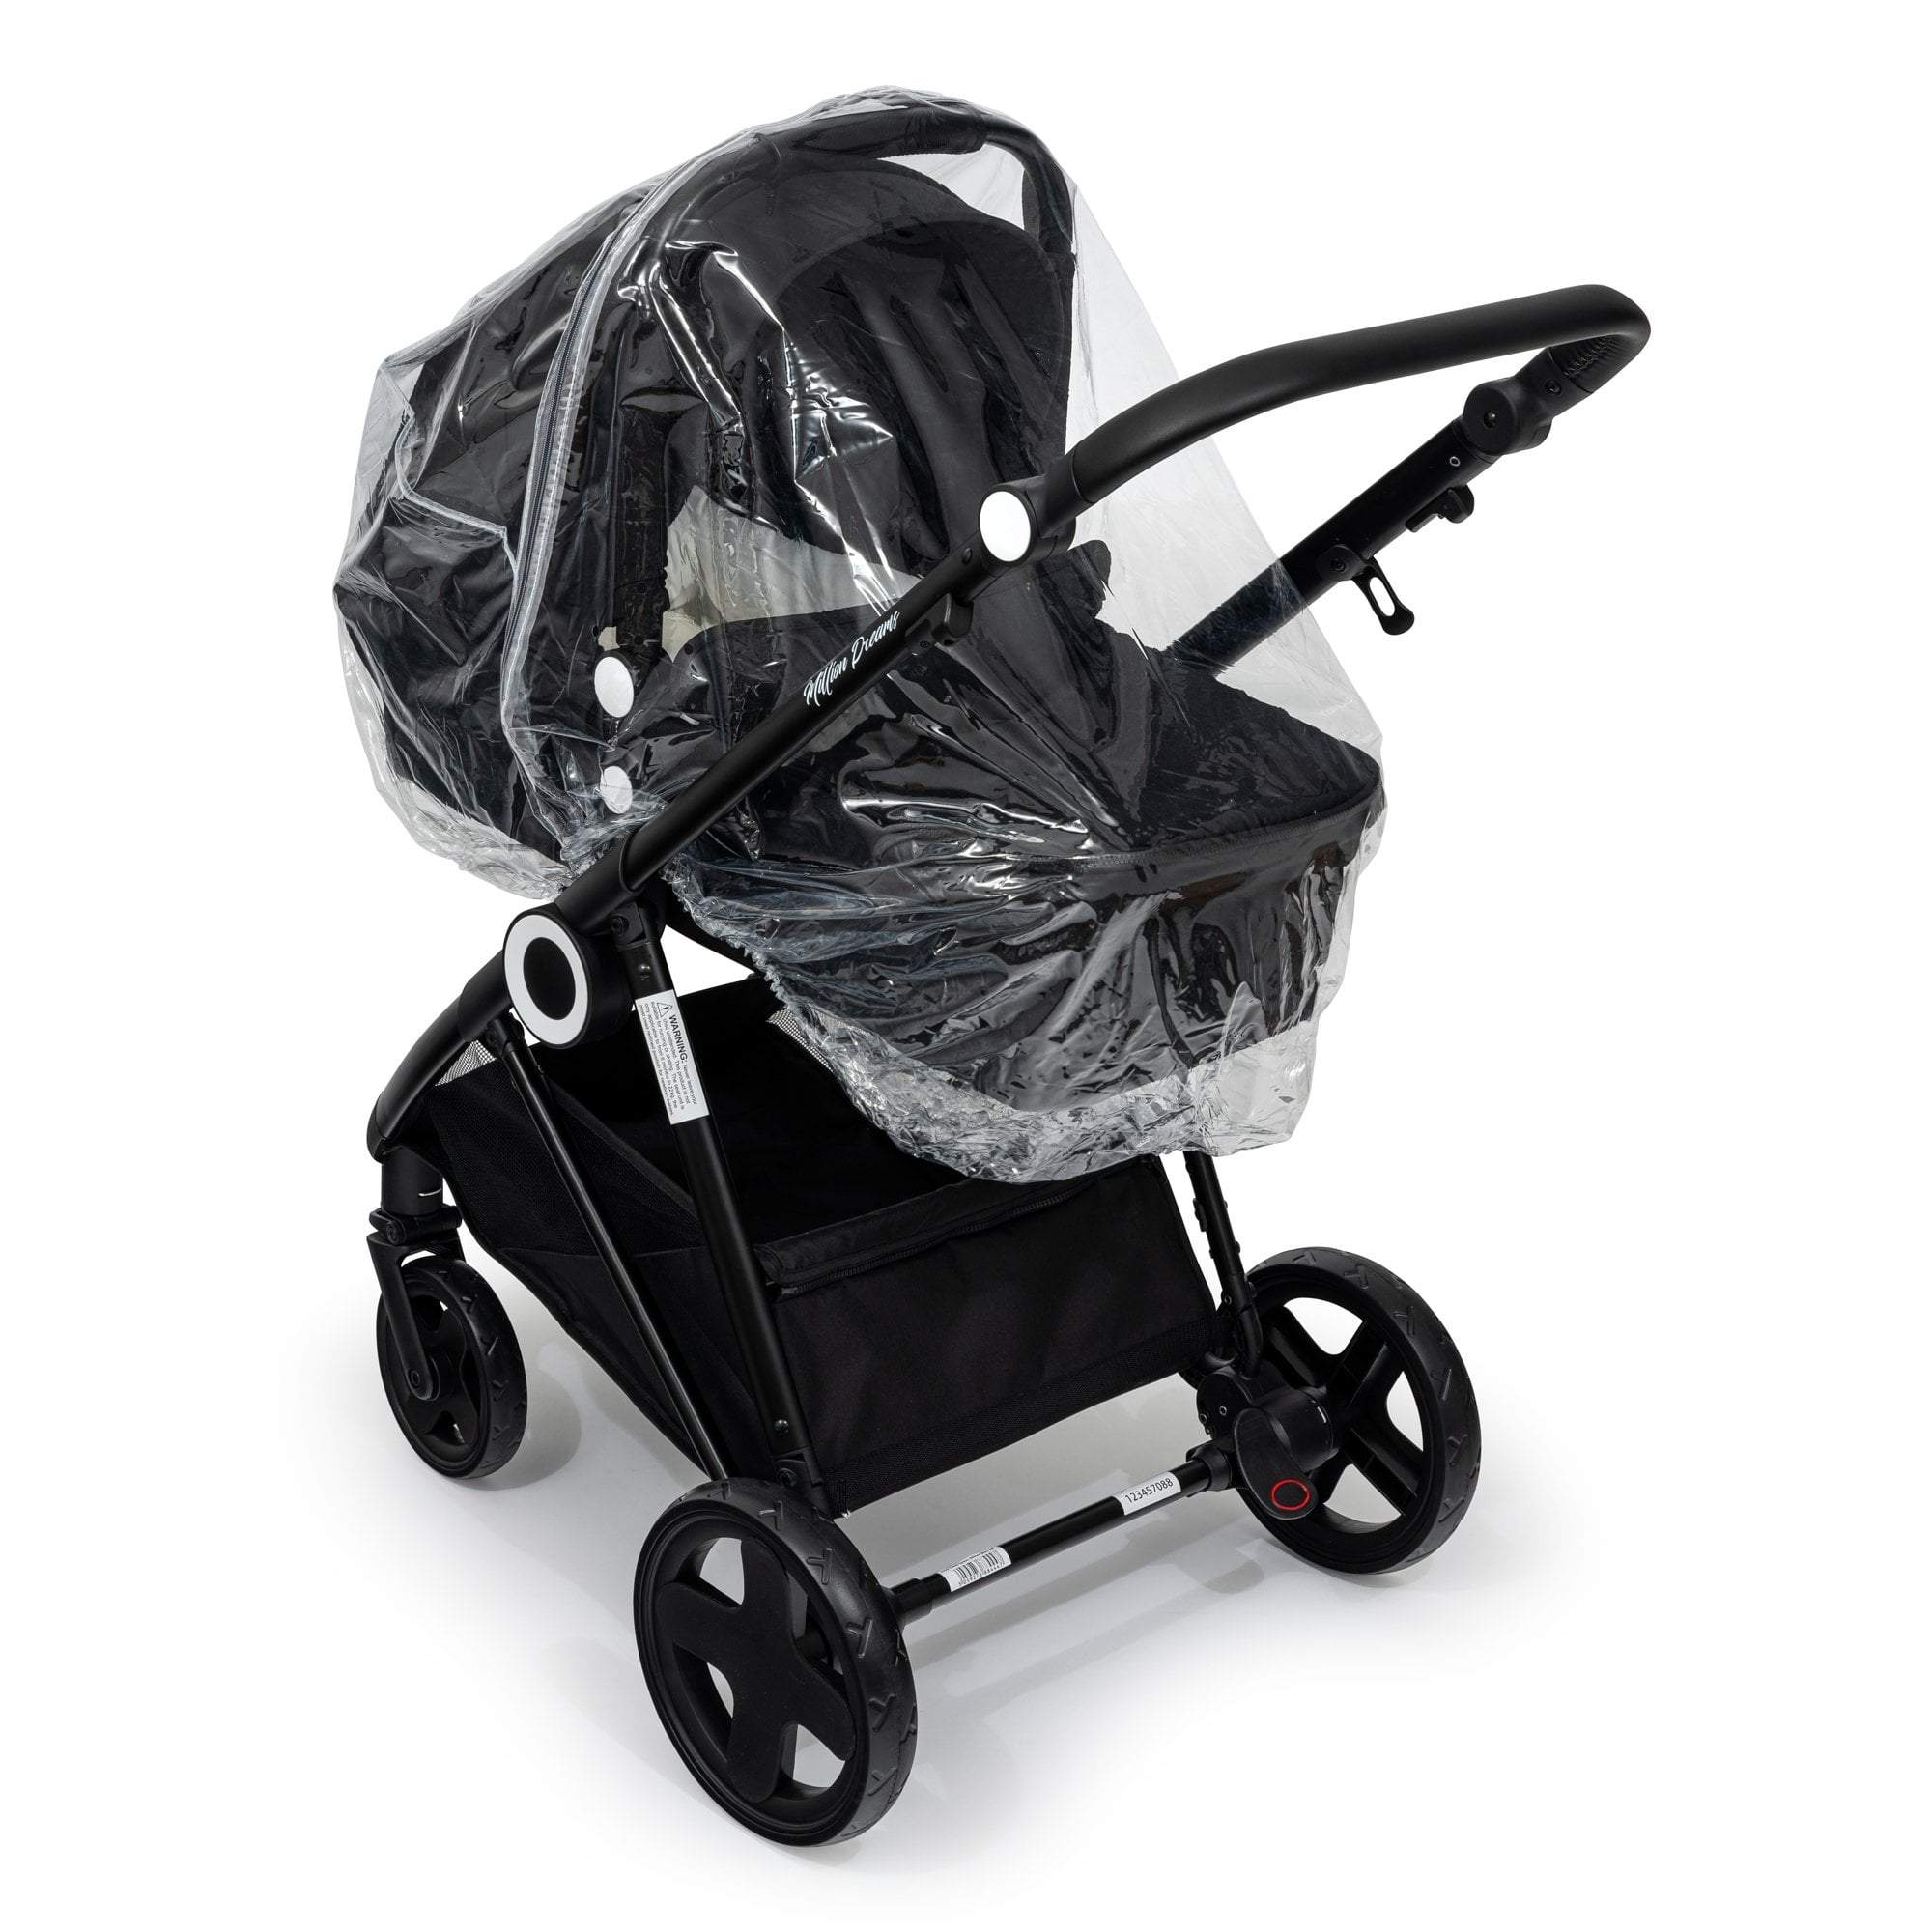 Carrycot Raincover Compatible With Phil & Teds - Fits All Models - For Your Little One